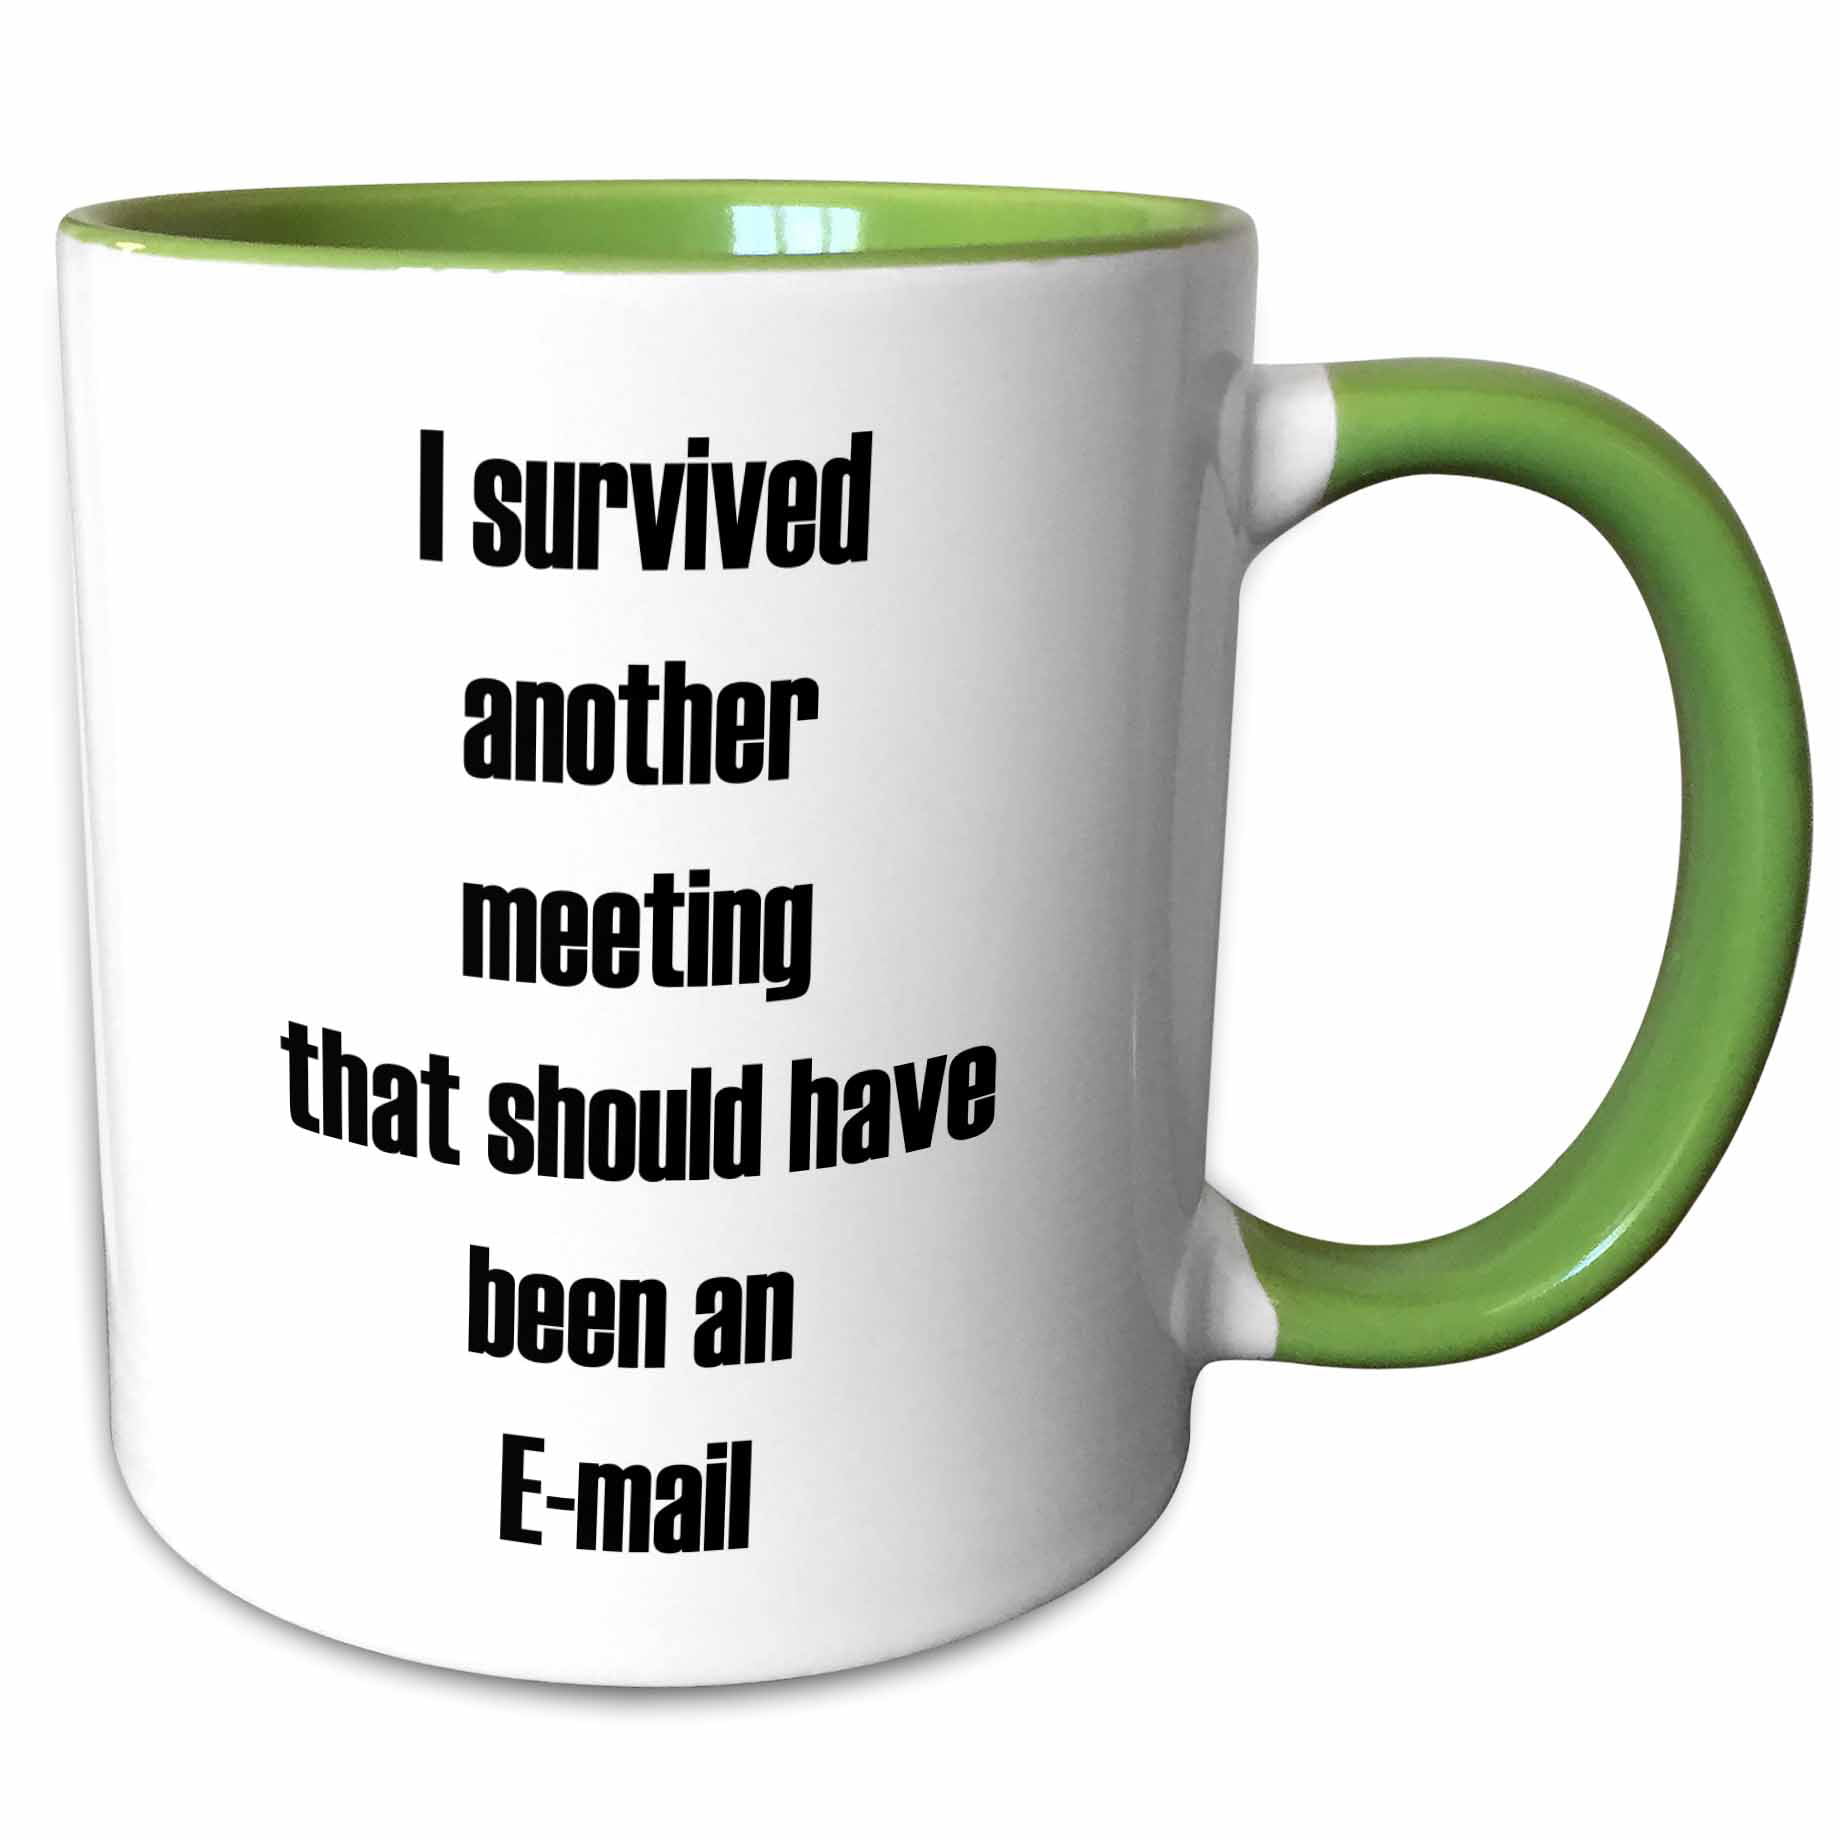 I Survived Another Meeting That Should Have Been an email Mug Coffee Mug 11 oz Ceramic Mug 